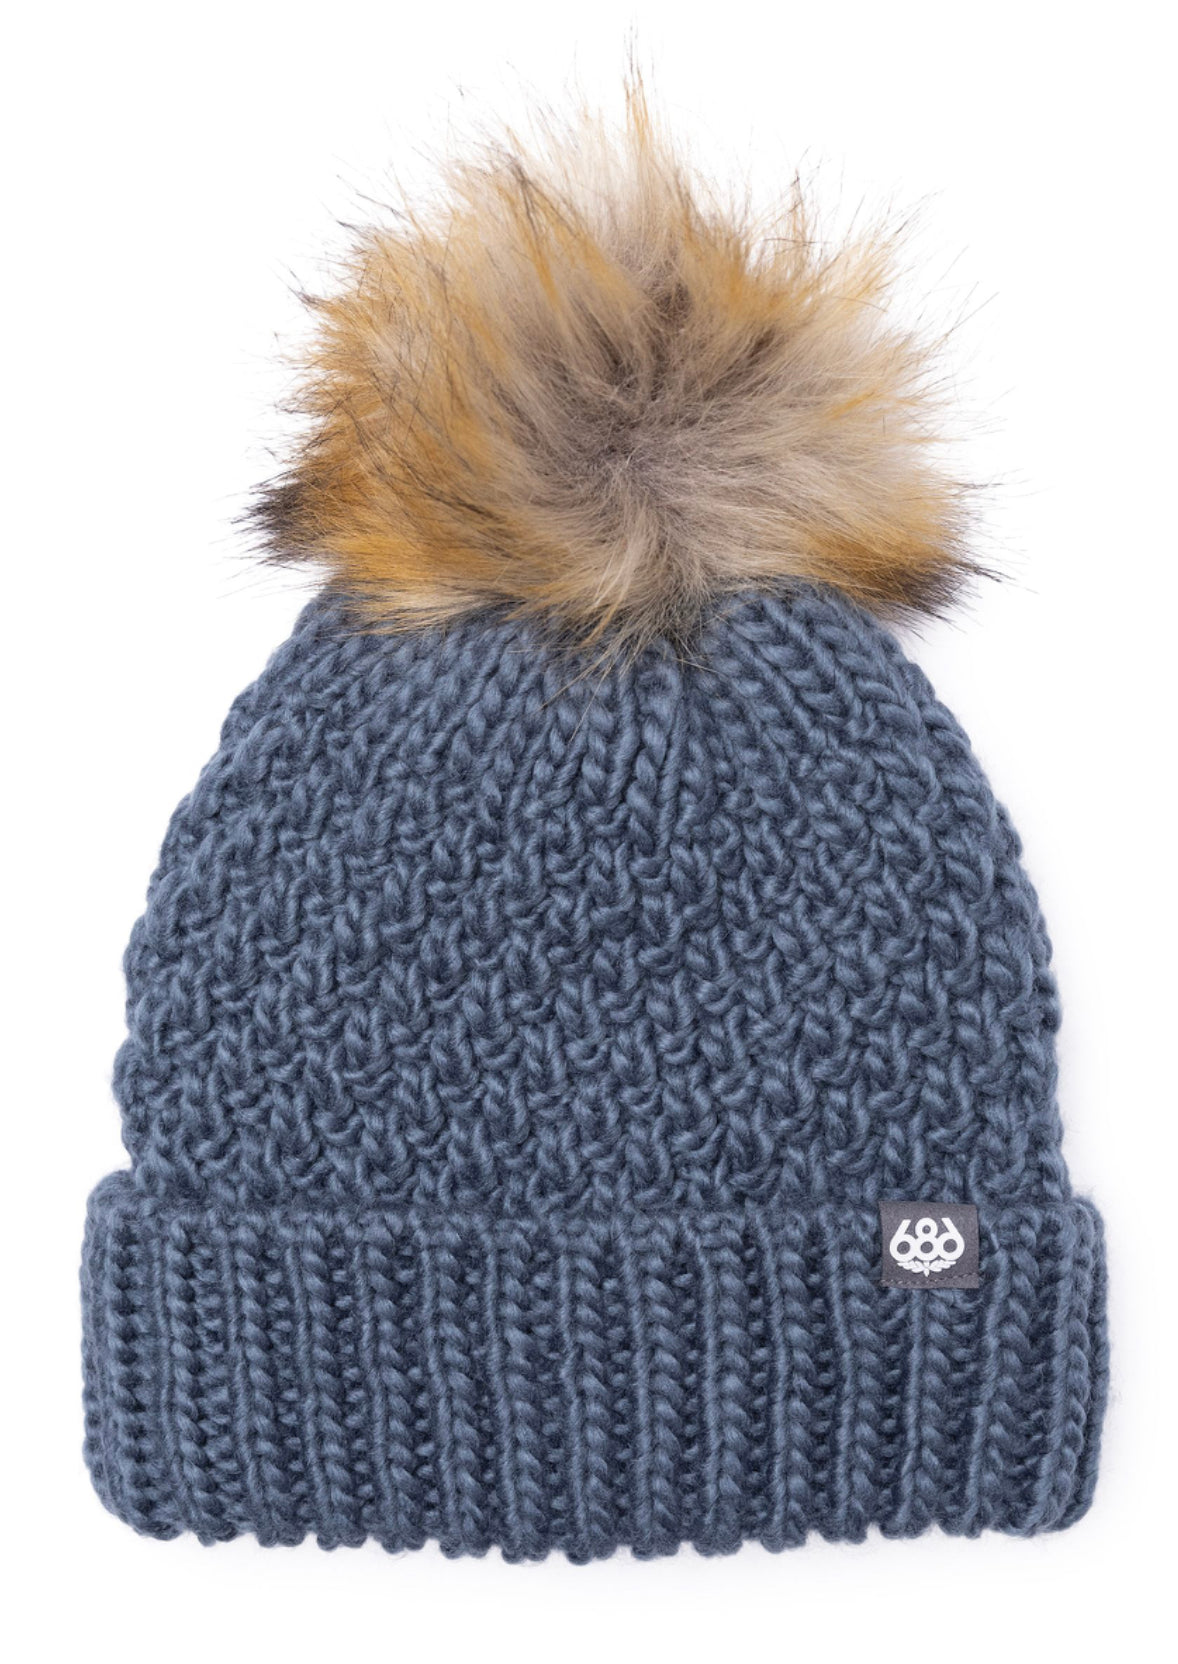 686 - Women’s Majesty Cable Knit Beanie